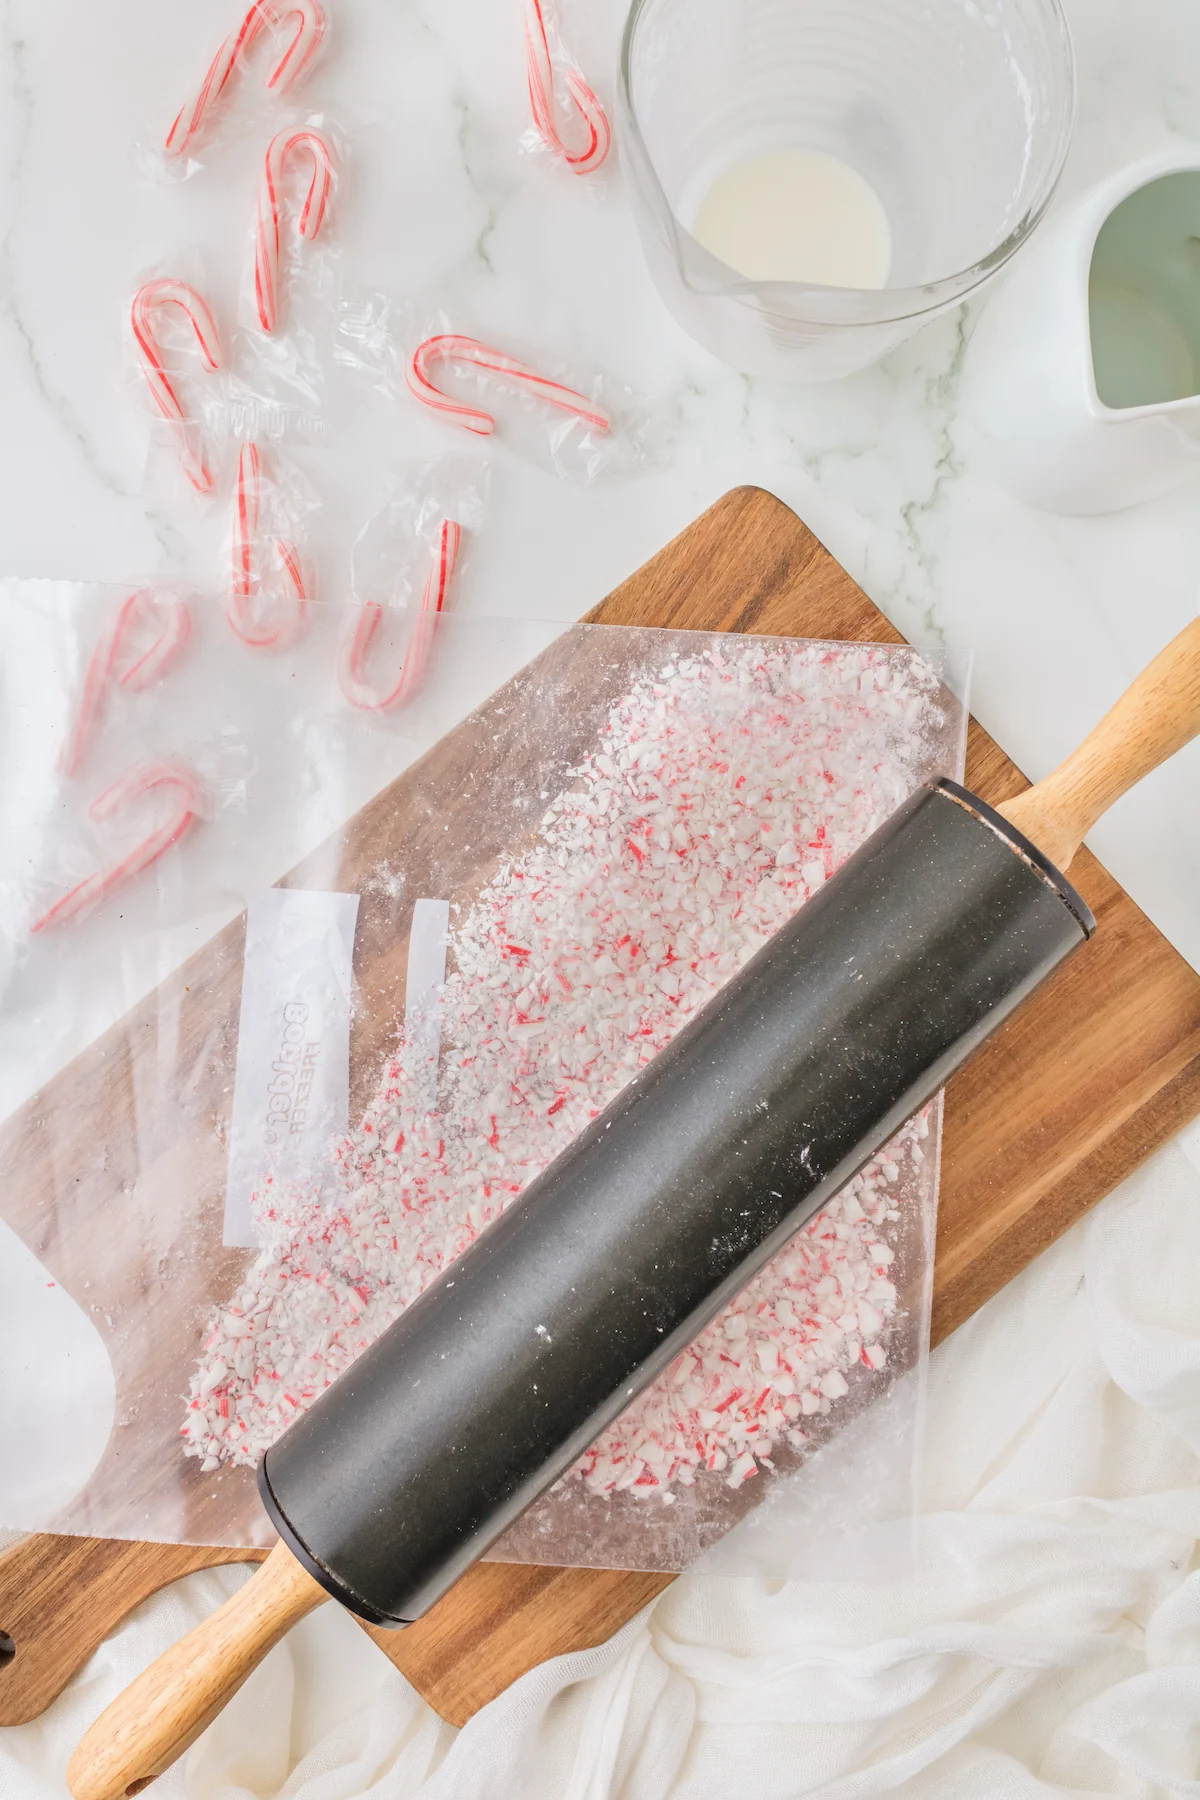 Crushing candy canes in a plastic bag with a rolling pin